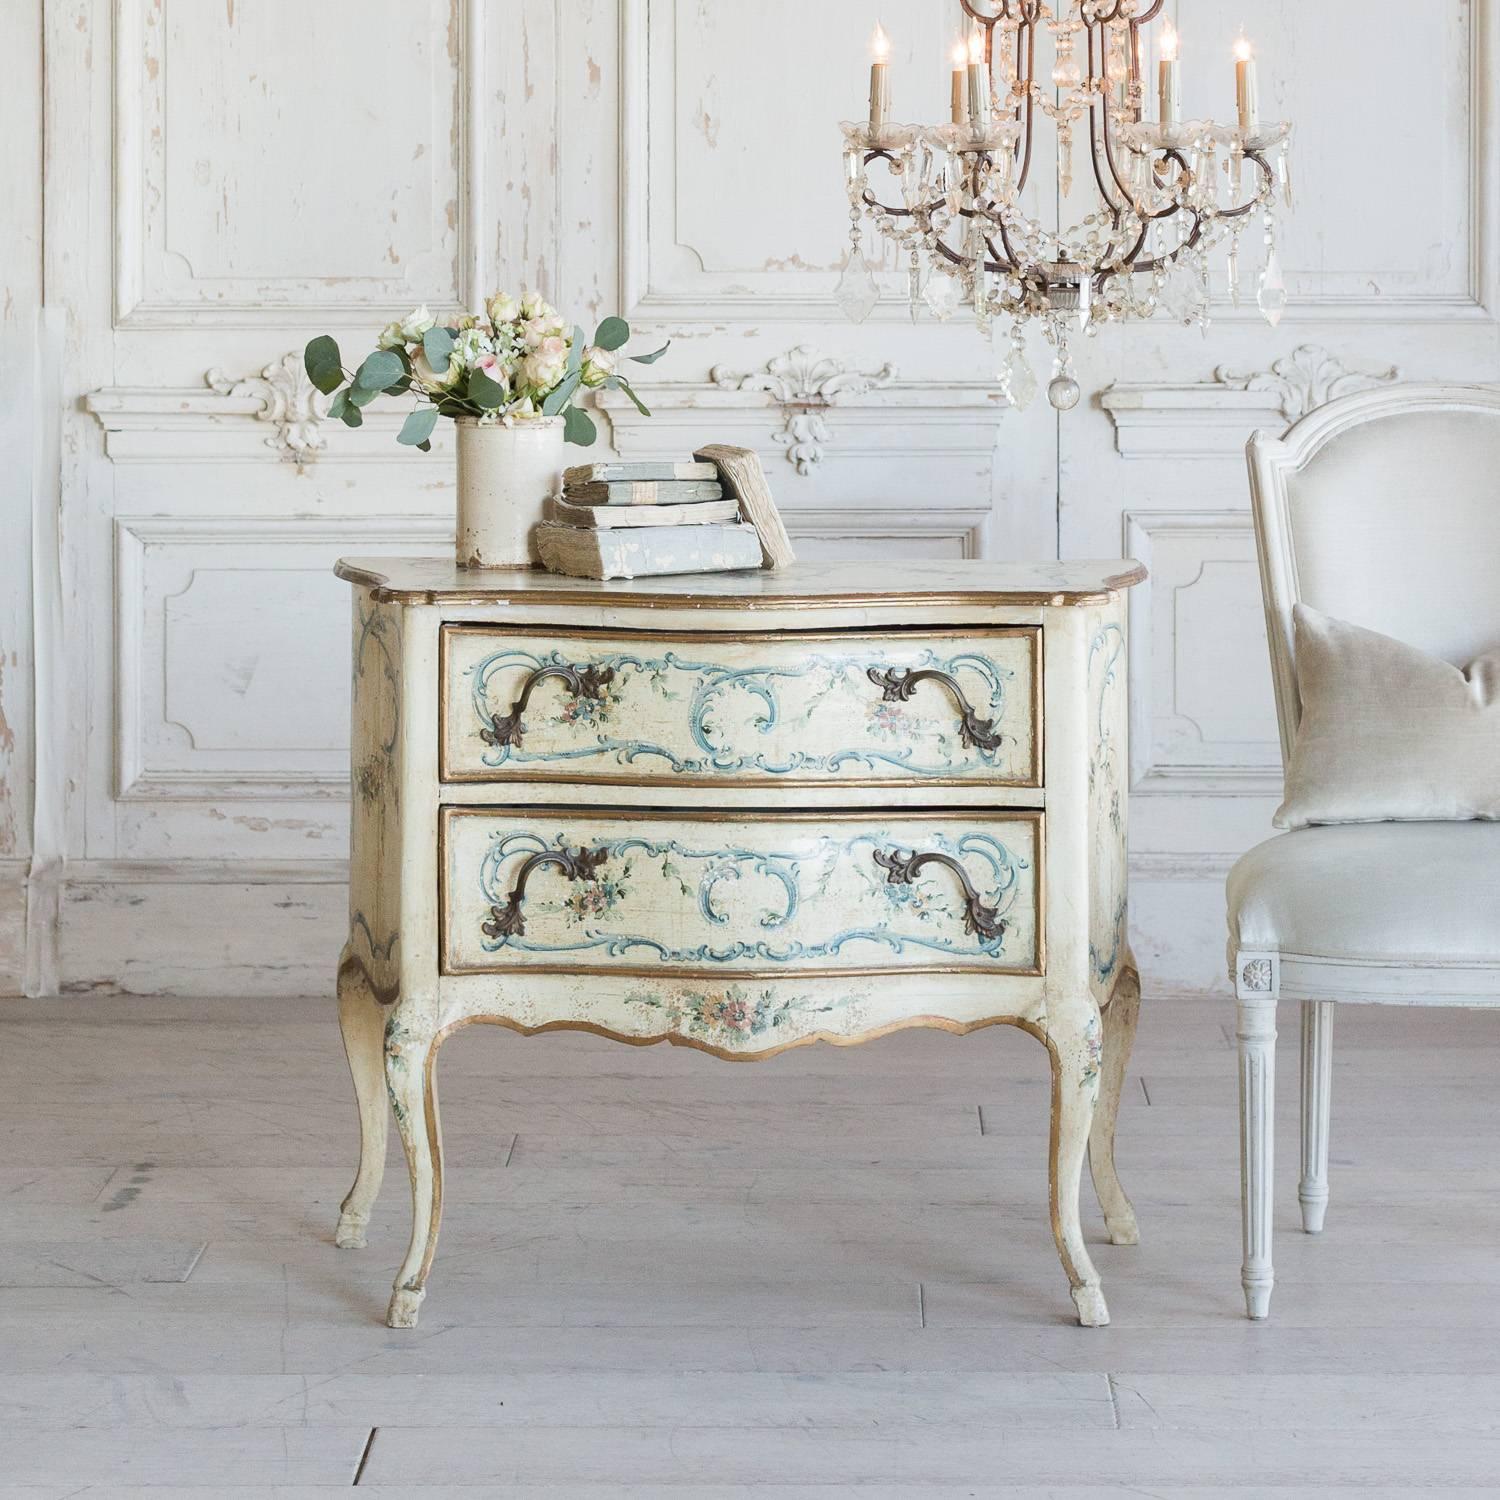 Charming antique nightstand commode in light buttercream finish with hand-painted flowers in pink and blue hues. Elaborate, Louis XV serpentine design adds charm and a touch of glamour to this piece. Two large drawers with a soft floral lining keep